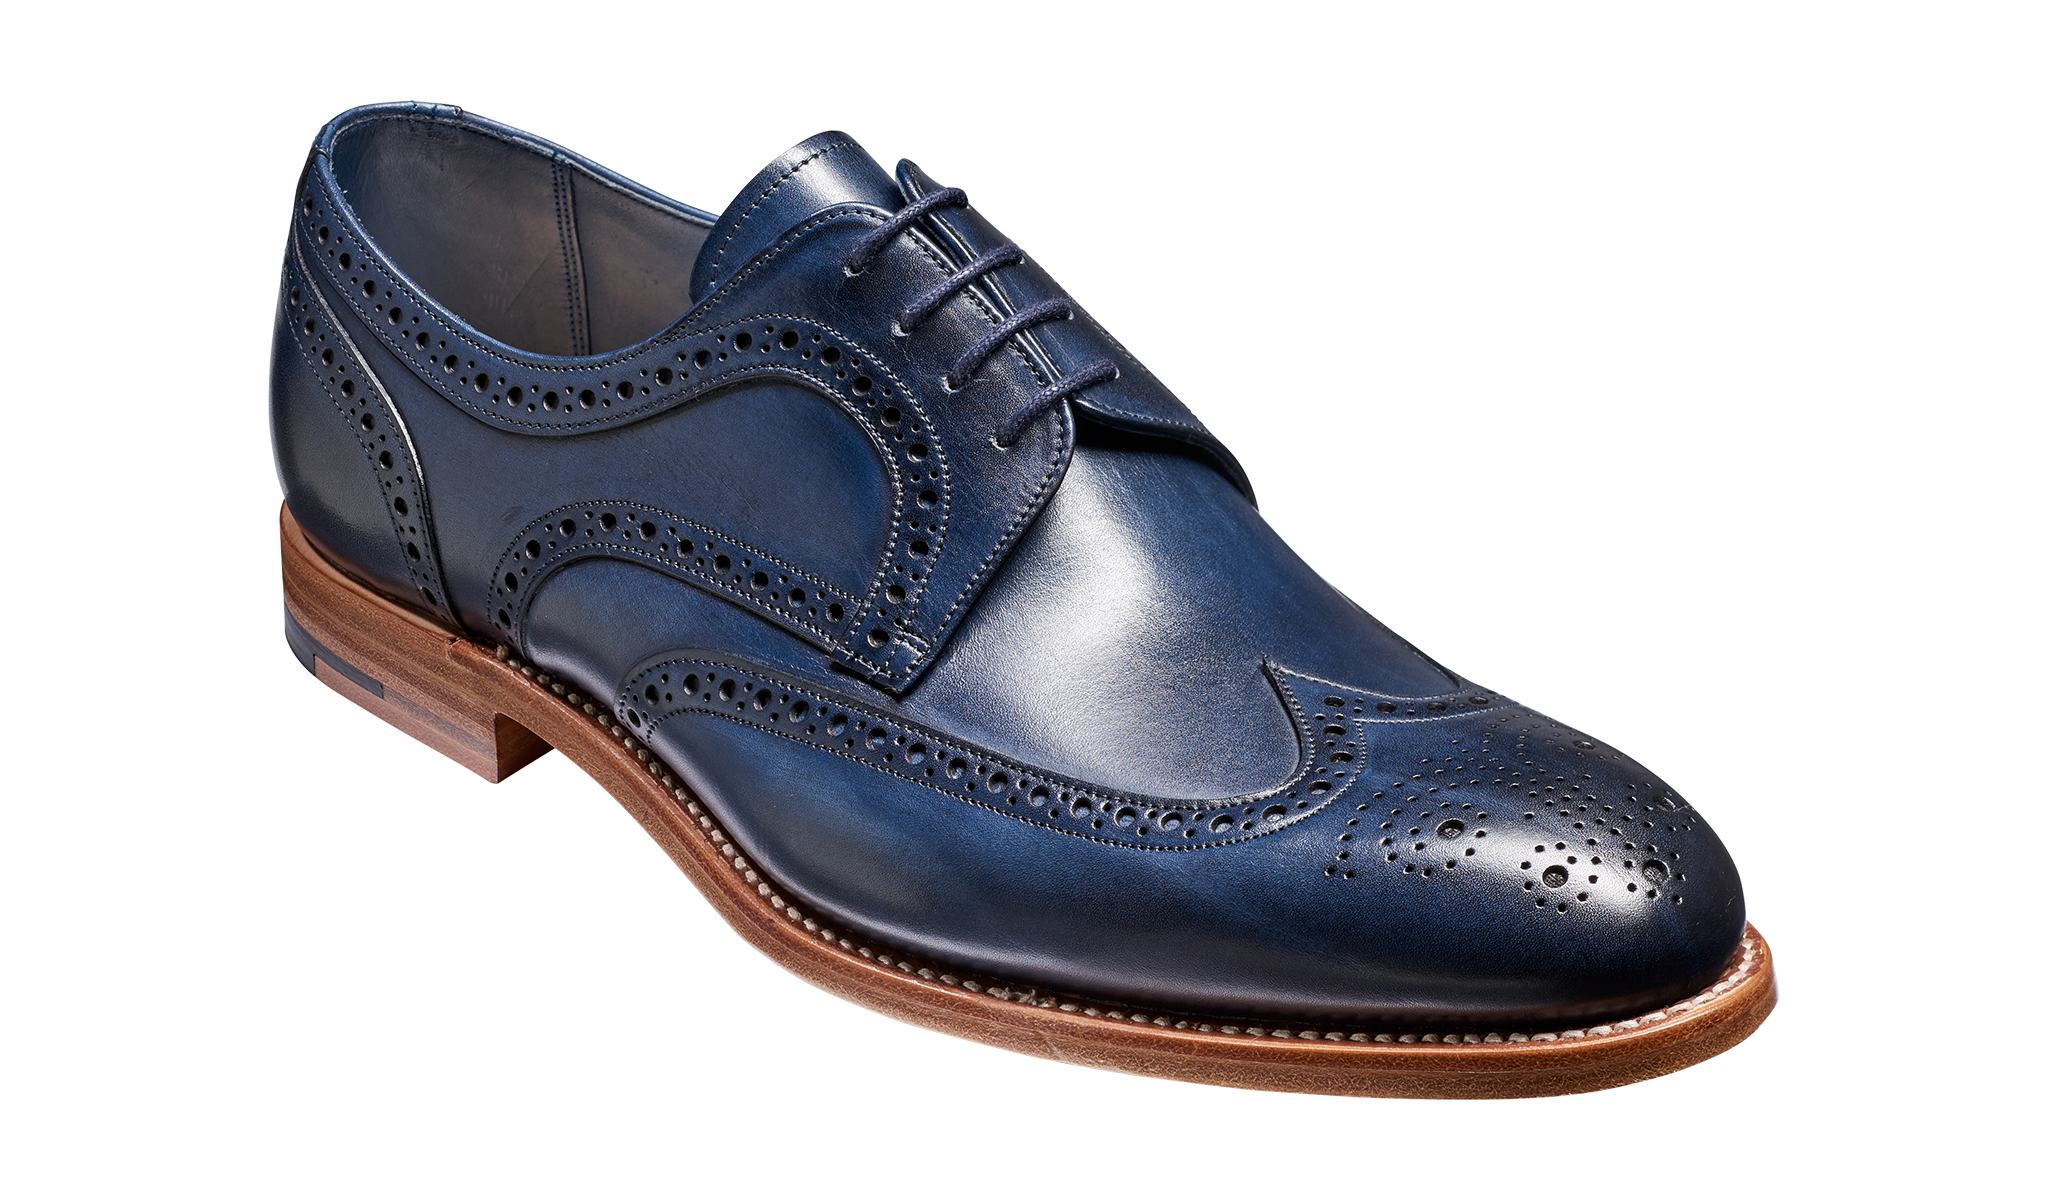 Victor - A navy hand painted men's derby by Barker Shoes